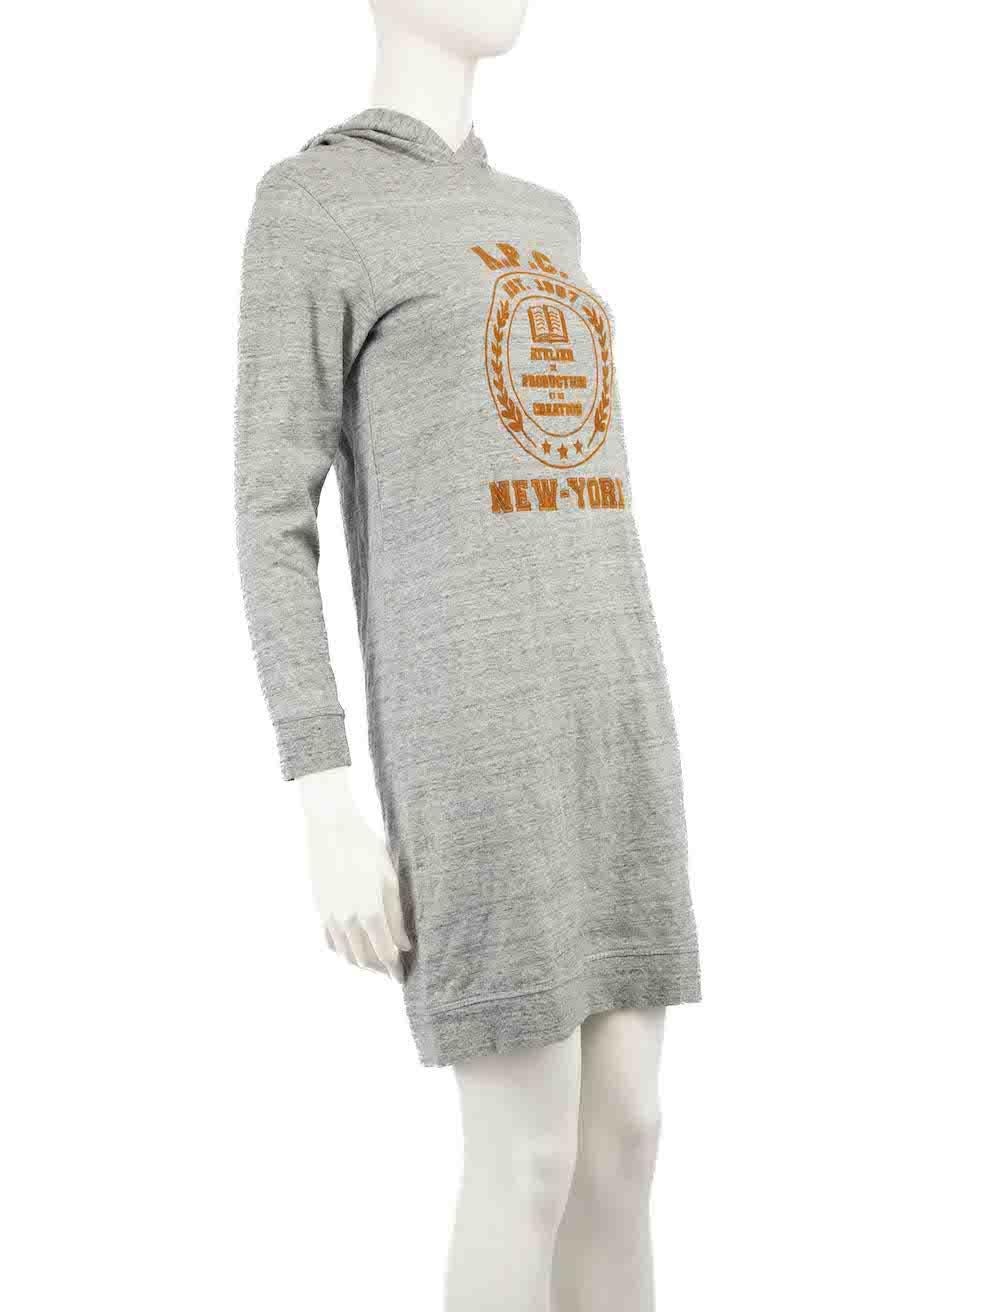 CONDITION is Never worn, with tags. No visible wear to dress is evident on this new A.P.C. designer resale item.
 
 
 
 Details
 
 
 Grey
 
 Cotton
 
 Sweater dress
 
 Hooded
 
 Brown velvet logo detail
 
 Long sleeves
 
 
 
 
 
 Made in China
 
 
